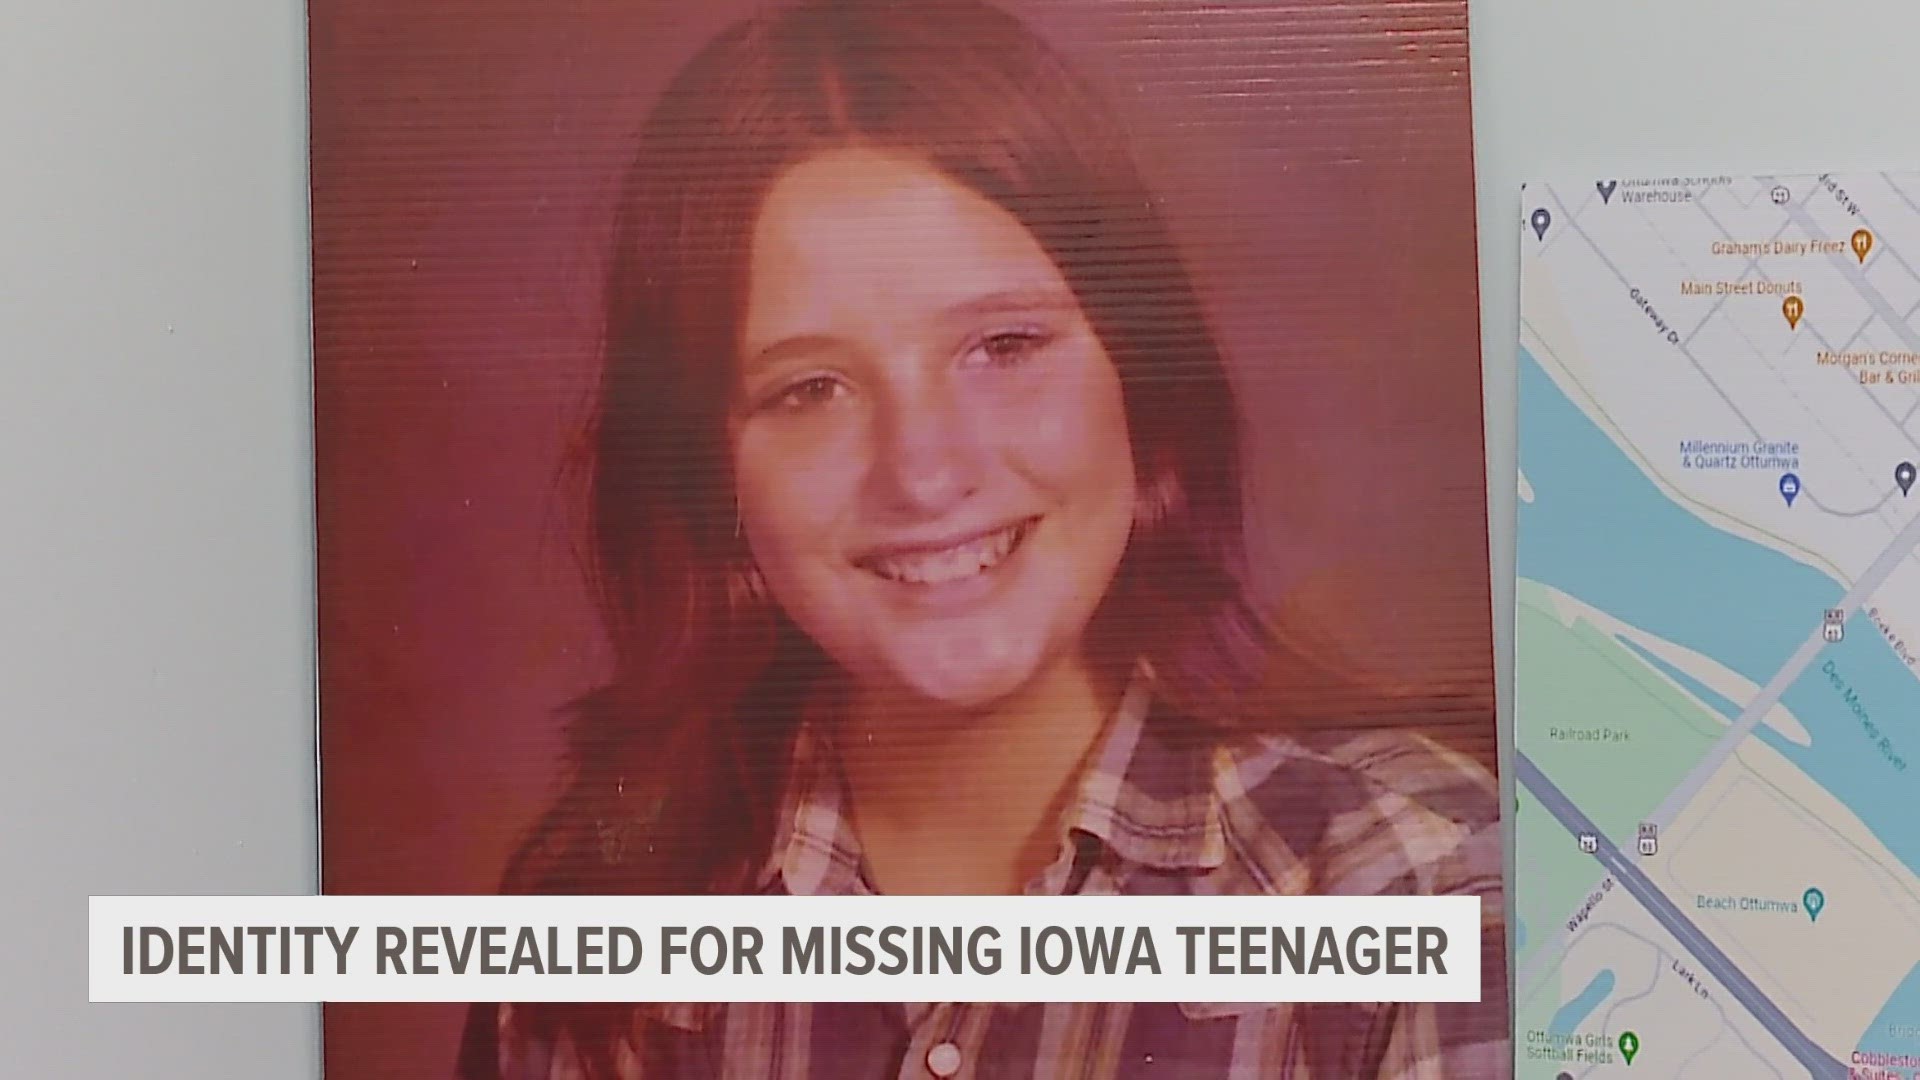 Southeast Missouri State University students along with anthropology professor Dr. Jennifer Bengtson are helping solve missing person's cases, including this one.